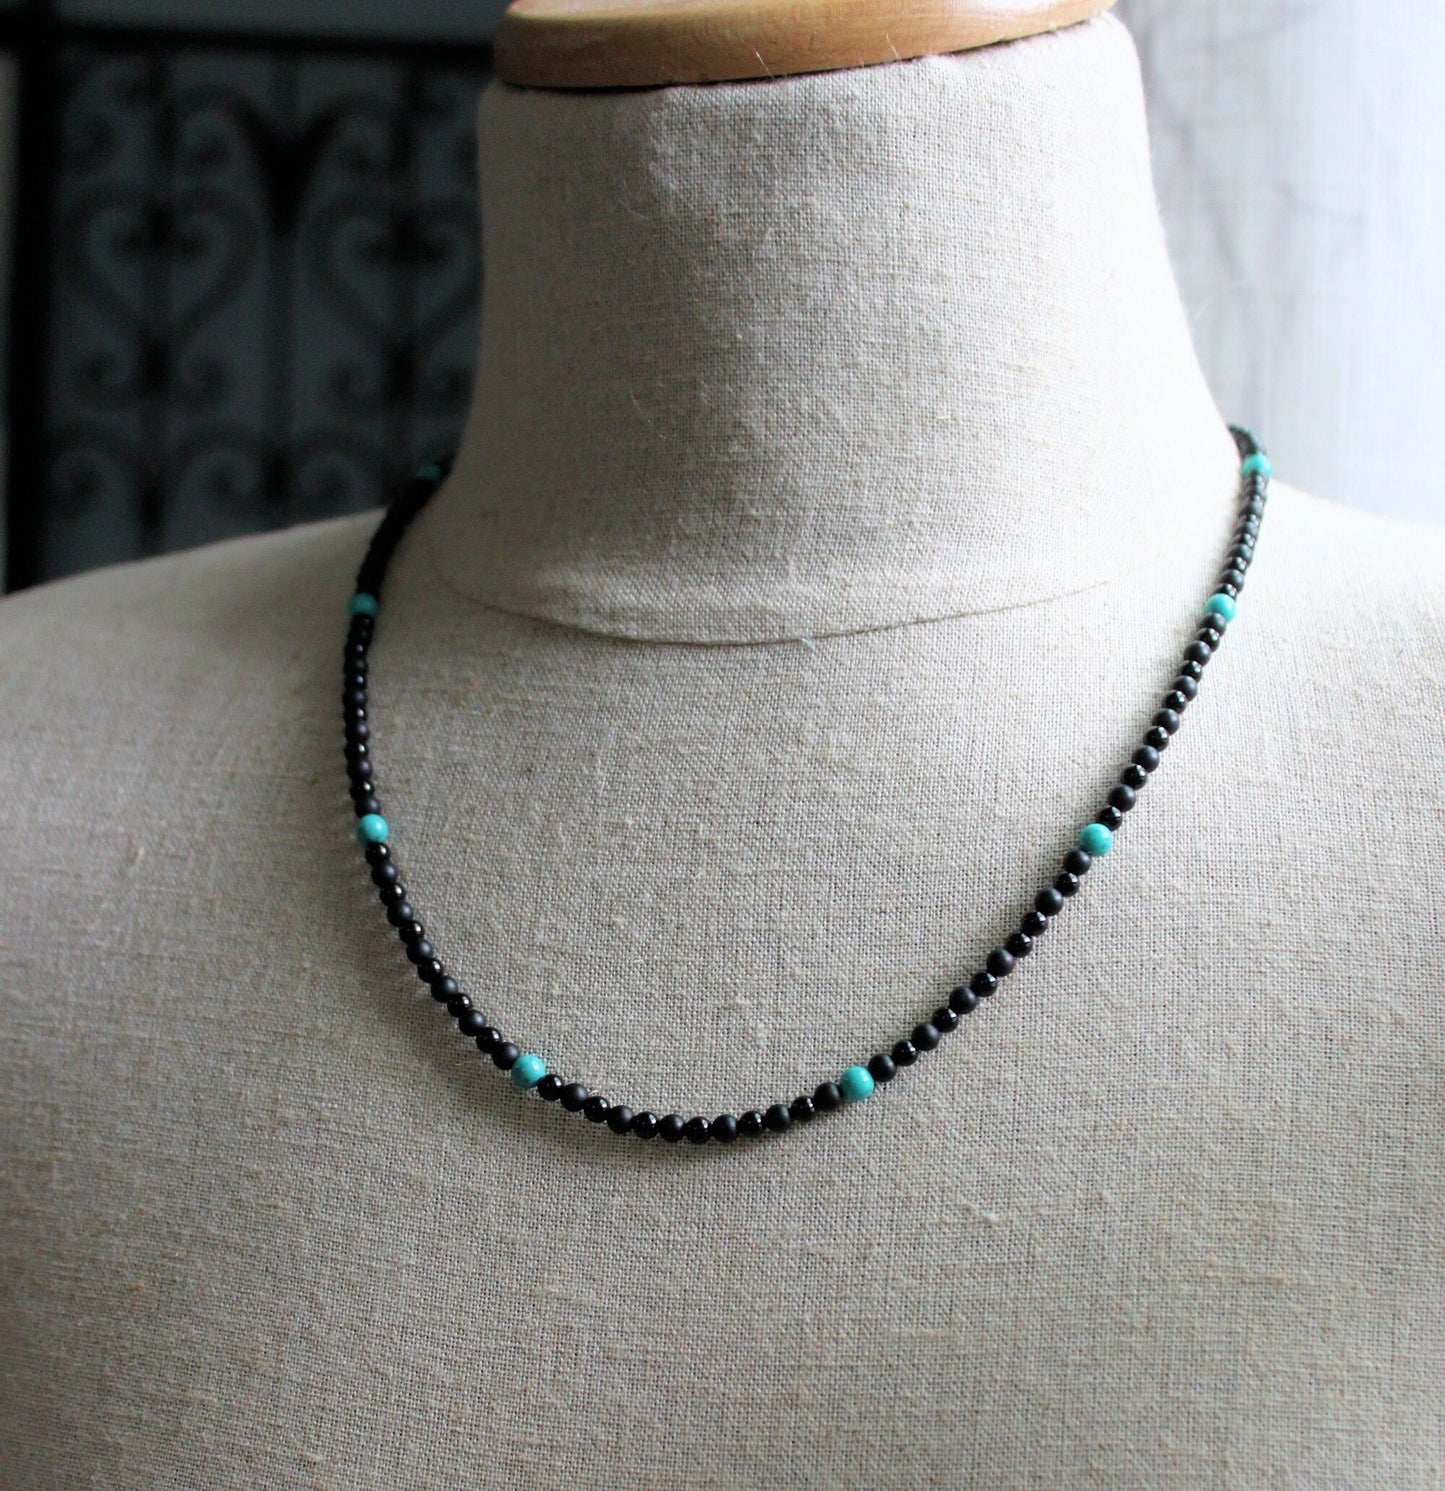 Black Onyx and Turquoise Bead Necklace